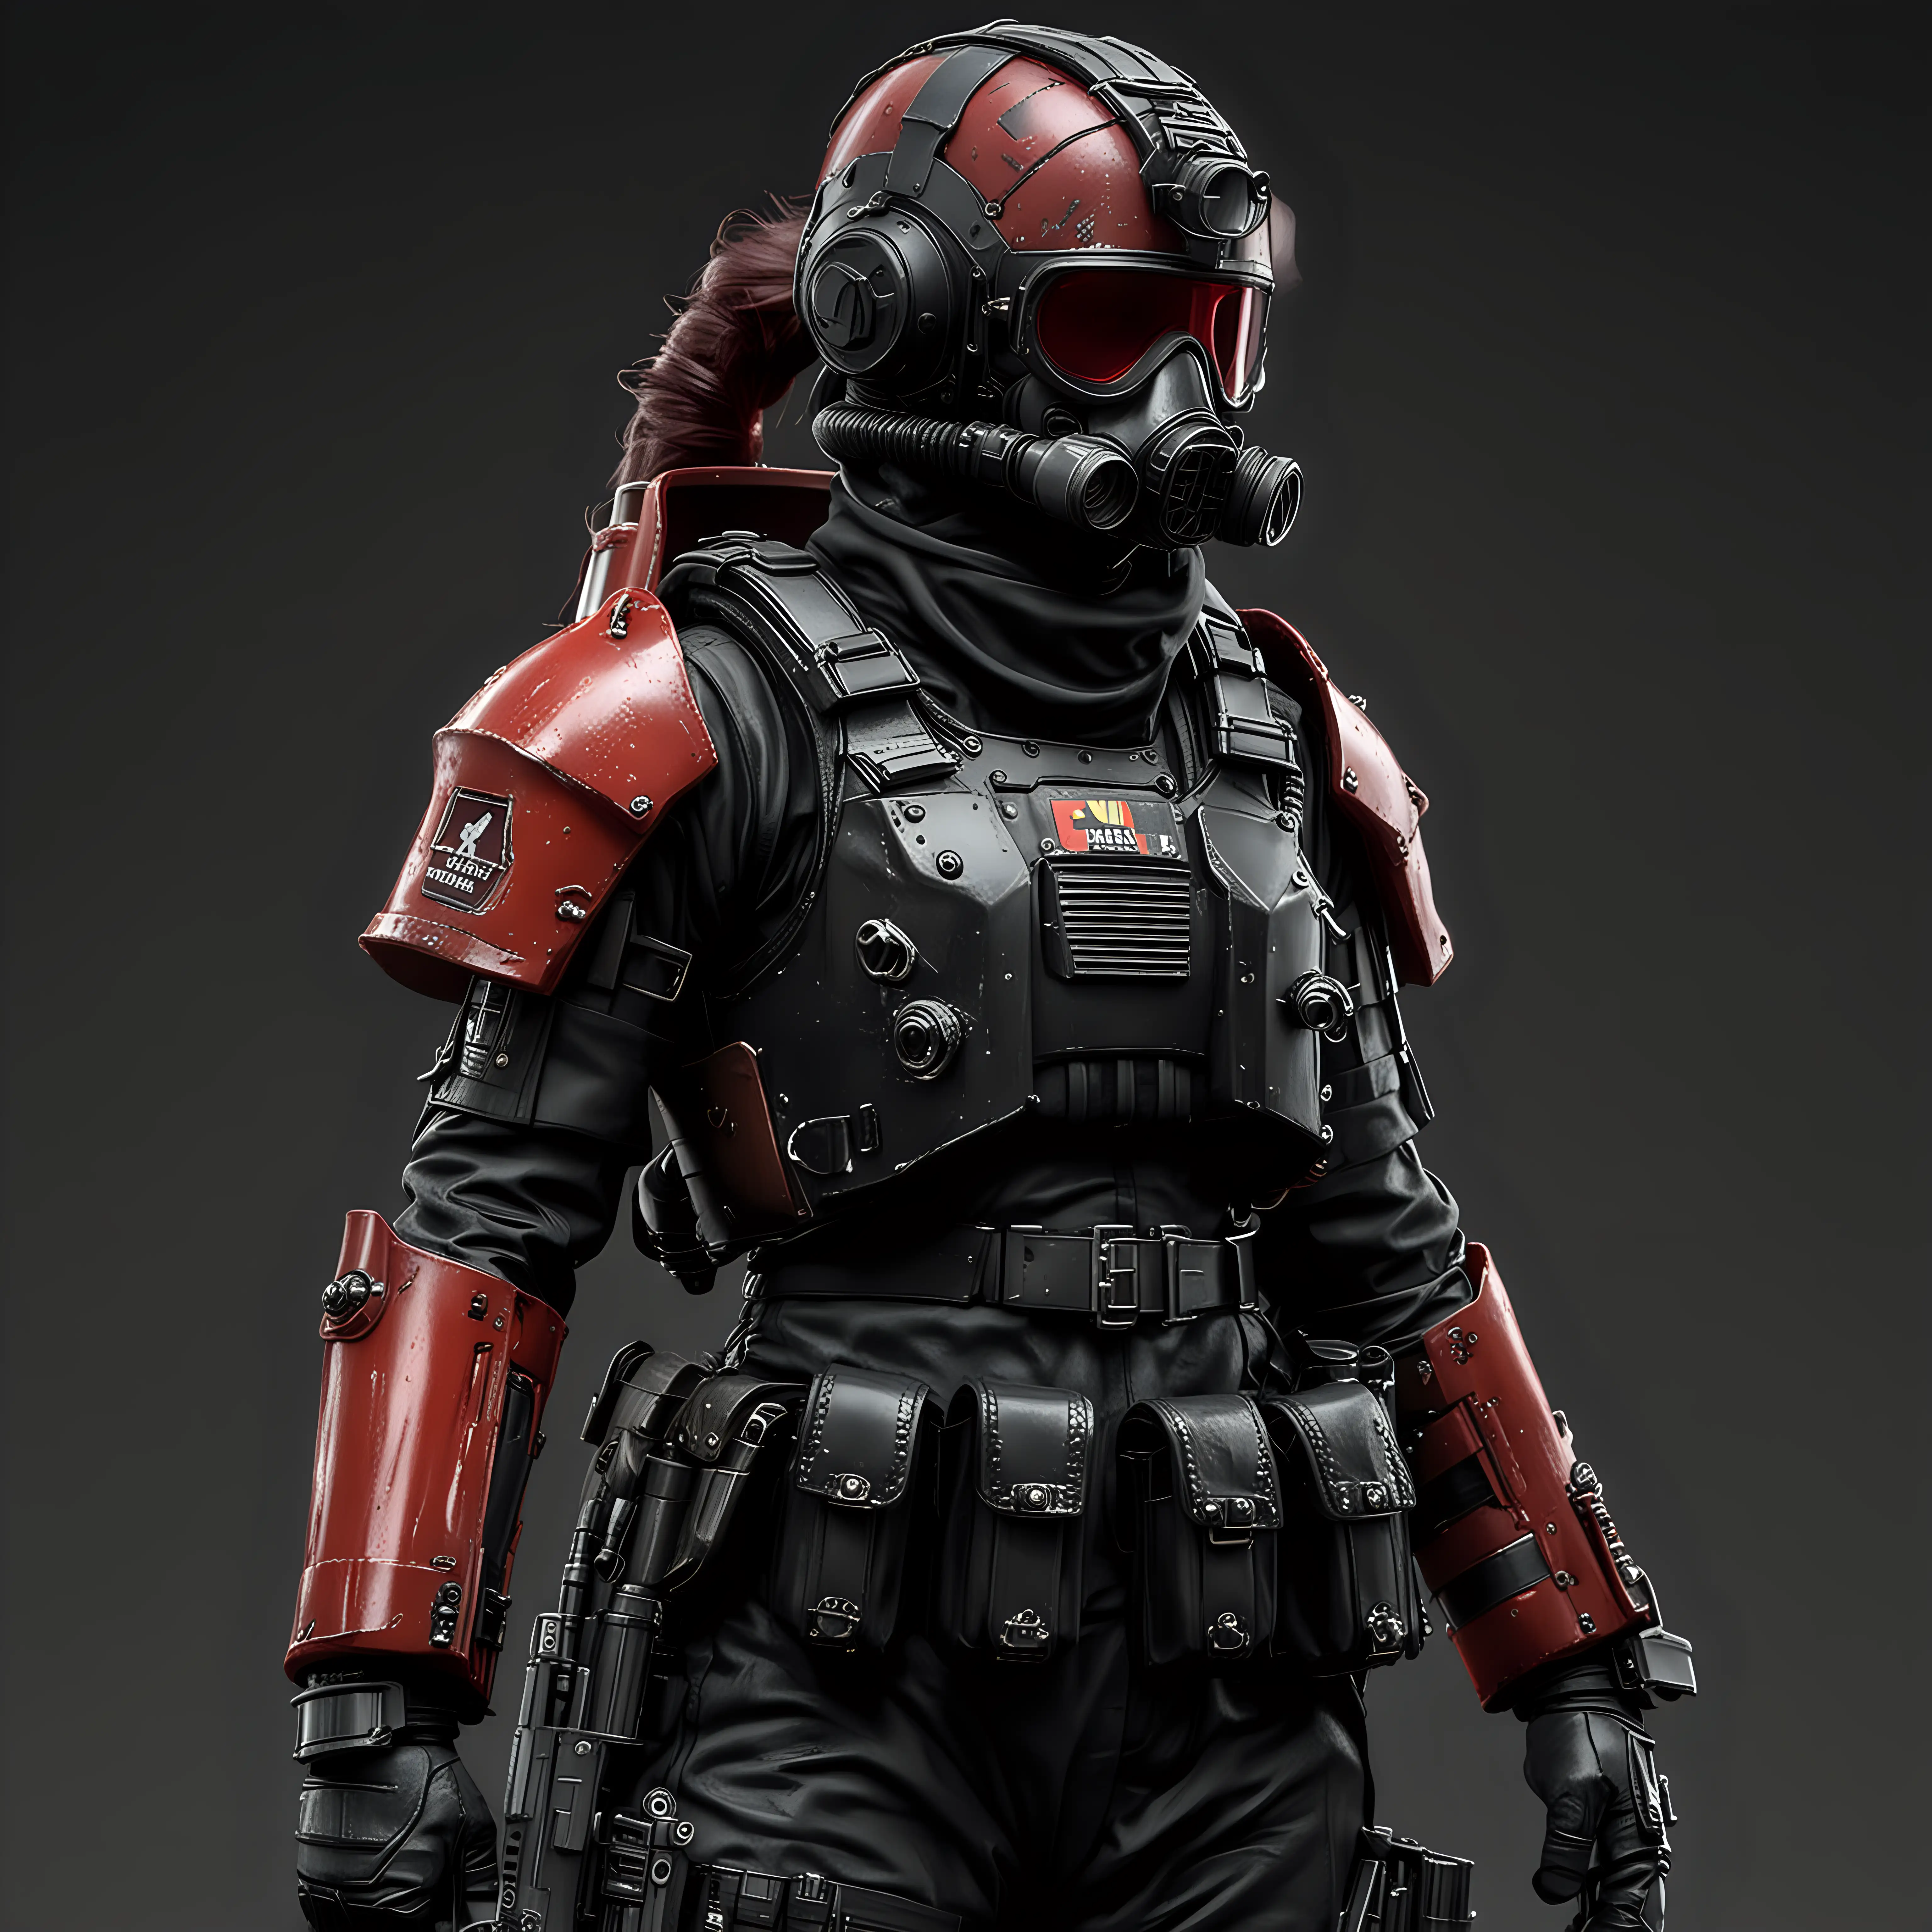 Female warhammer 40k imperial guard soldier in a closed environment suit with an smg and air tank backpack. Black uniform, tight uniform. Full-head helmet and gas mask. Dark red glass visor covers the eyes.